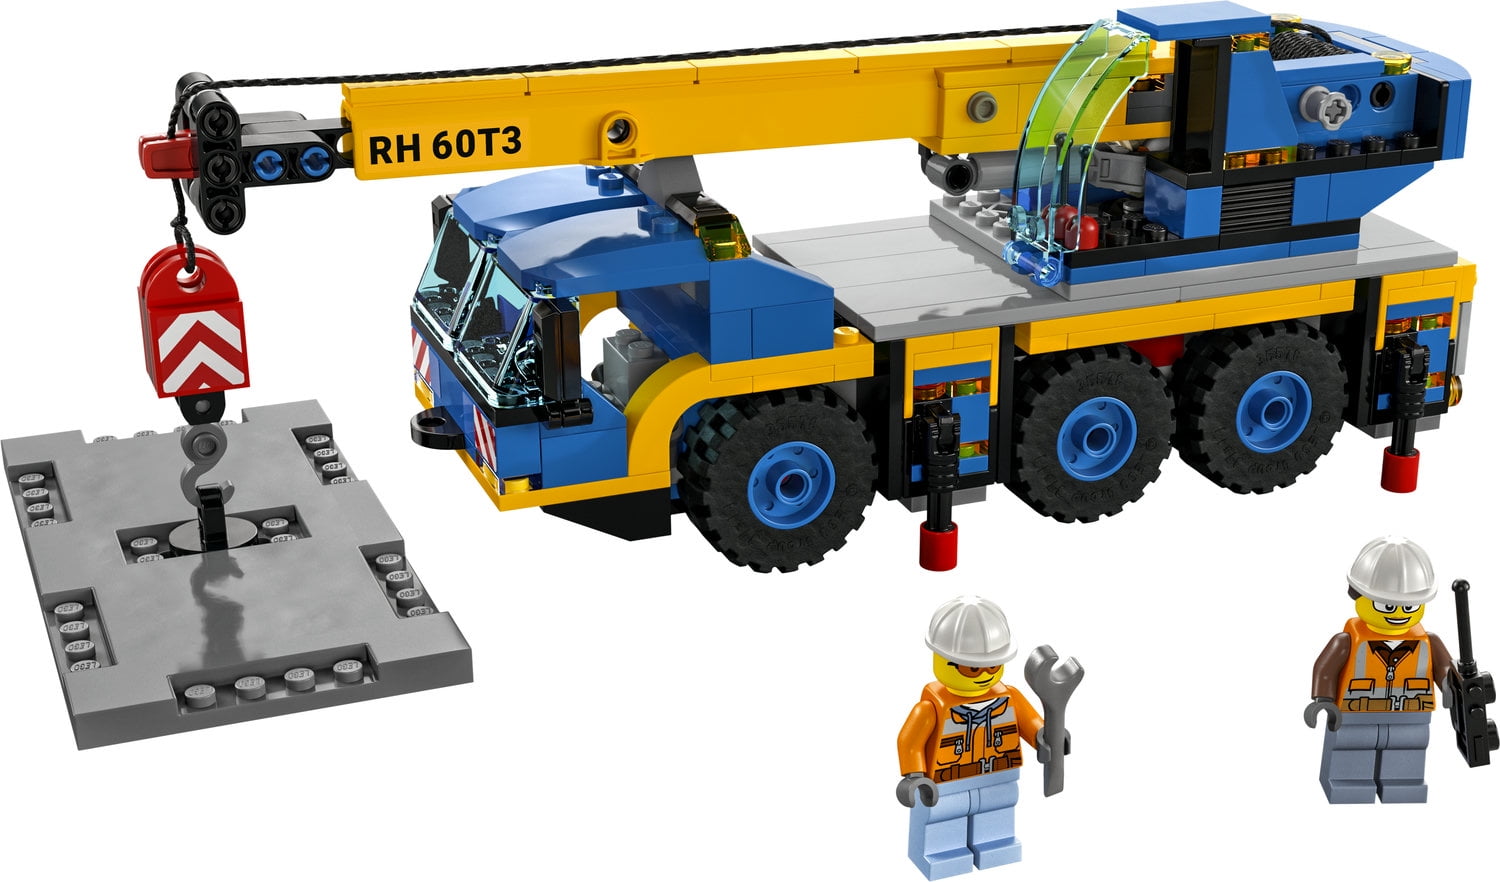 LEGO City Great Vehicles Mobile Crane Truck Toy Building Set 60324 -  Construction Vehicle Model, Featuring 2 Minifigures with Tool Toys Kit and  Road Plate, Playset for Boys and Girls Ages 7+ 